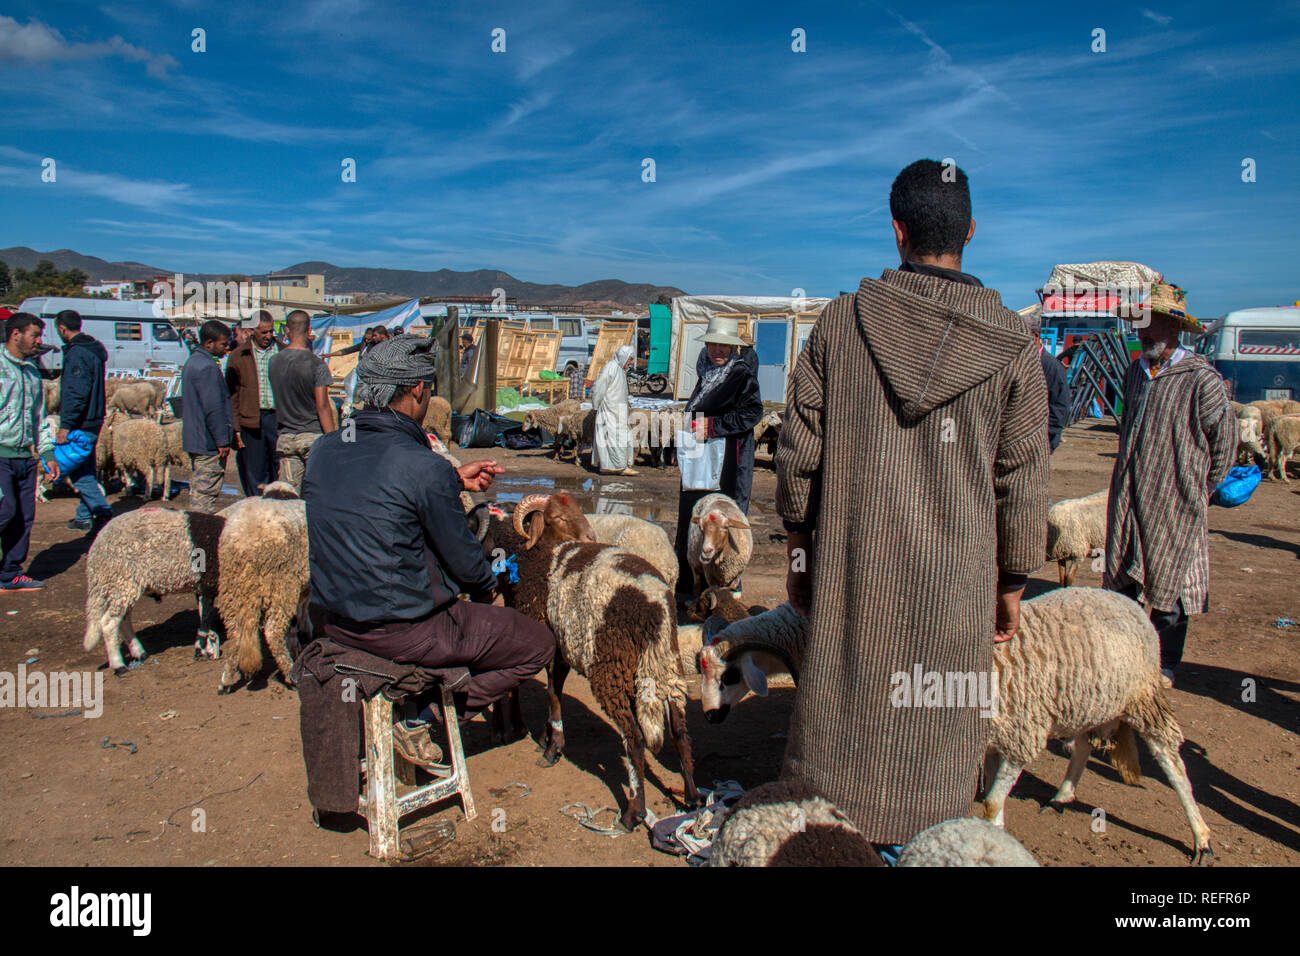 Oued Laou, Chefchaouen, Morocco - November 03, 2018: Cattle sellers and buyers at the outdoor market that is installed every Saturday Stock Photo